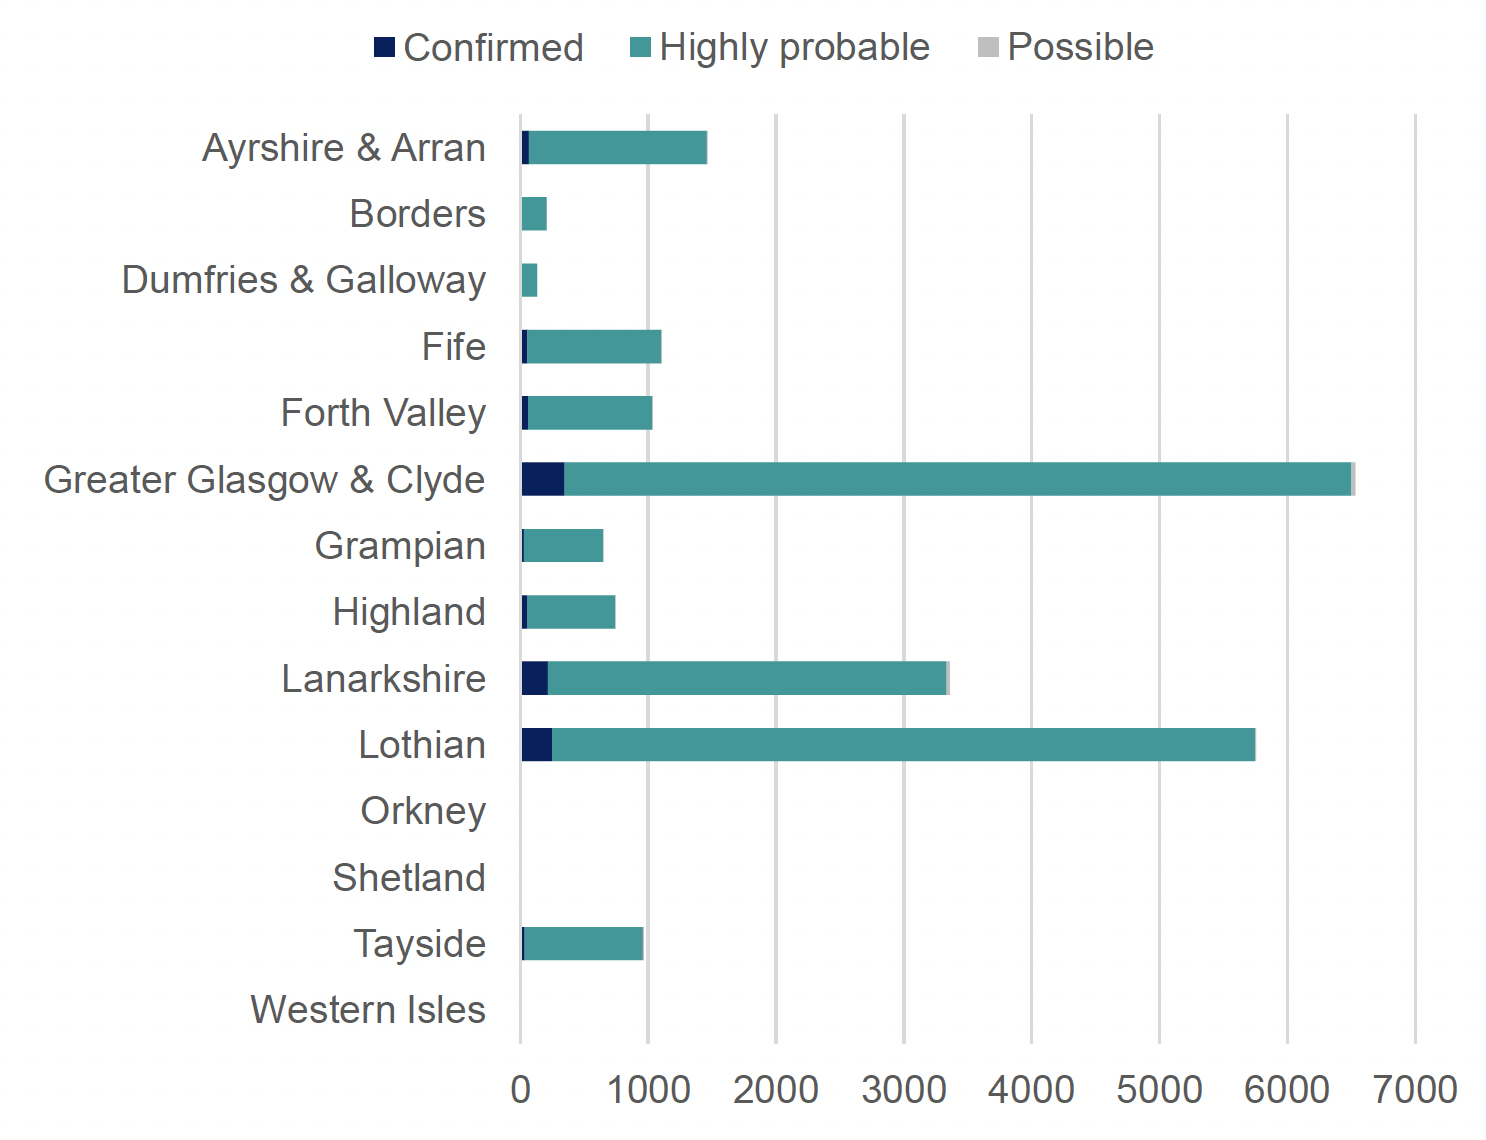 This column chart shows a breakdown of Omicron cases in Scotland by health board, also indicating whether the positive Covid-19 case is a confirmed, highly probable or possible Omicron variant case. NHS Greater Glasgow and Clyde had the highest number of confirmed, highly probable and possible Omicron cases, followed by NHS Lothian and NHS Lanarkshire. The majority of cases across the health boards are highly probable. 